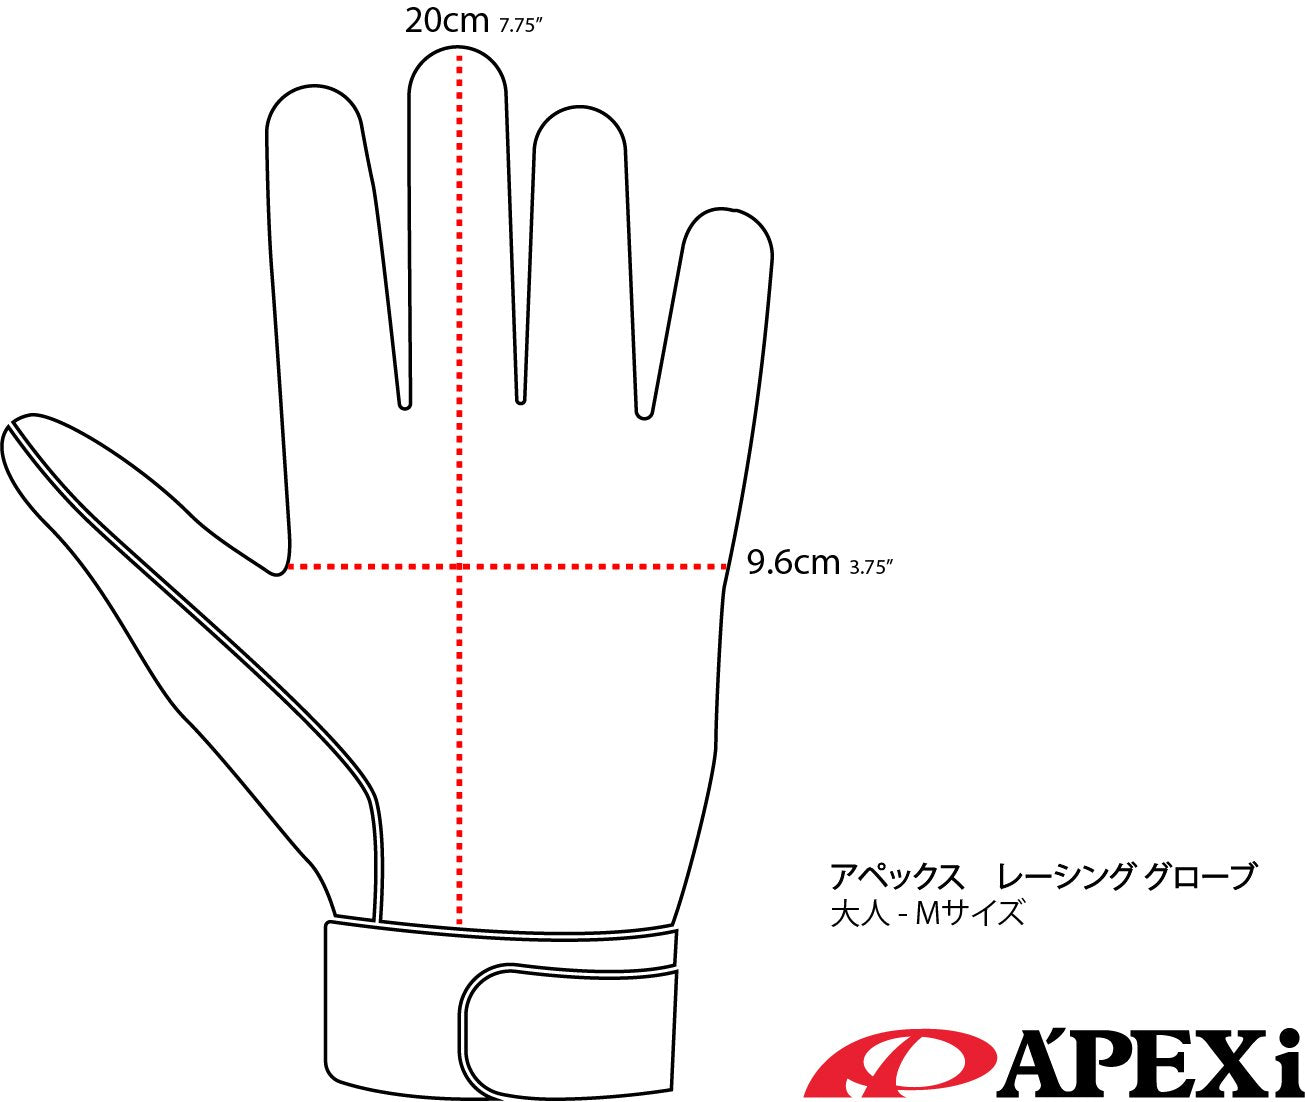 Apexi A'PEXi Racing Gloves- [Final Run - Limited Quantities Available]